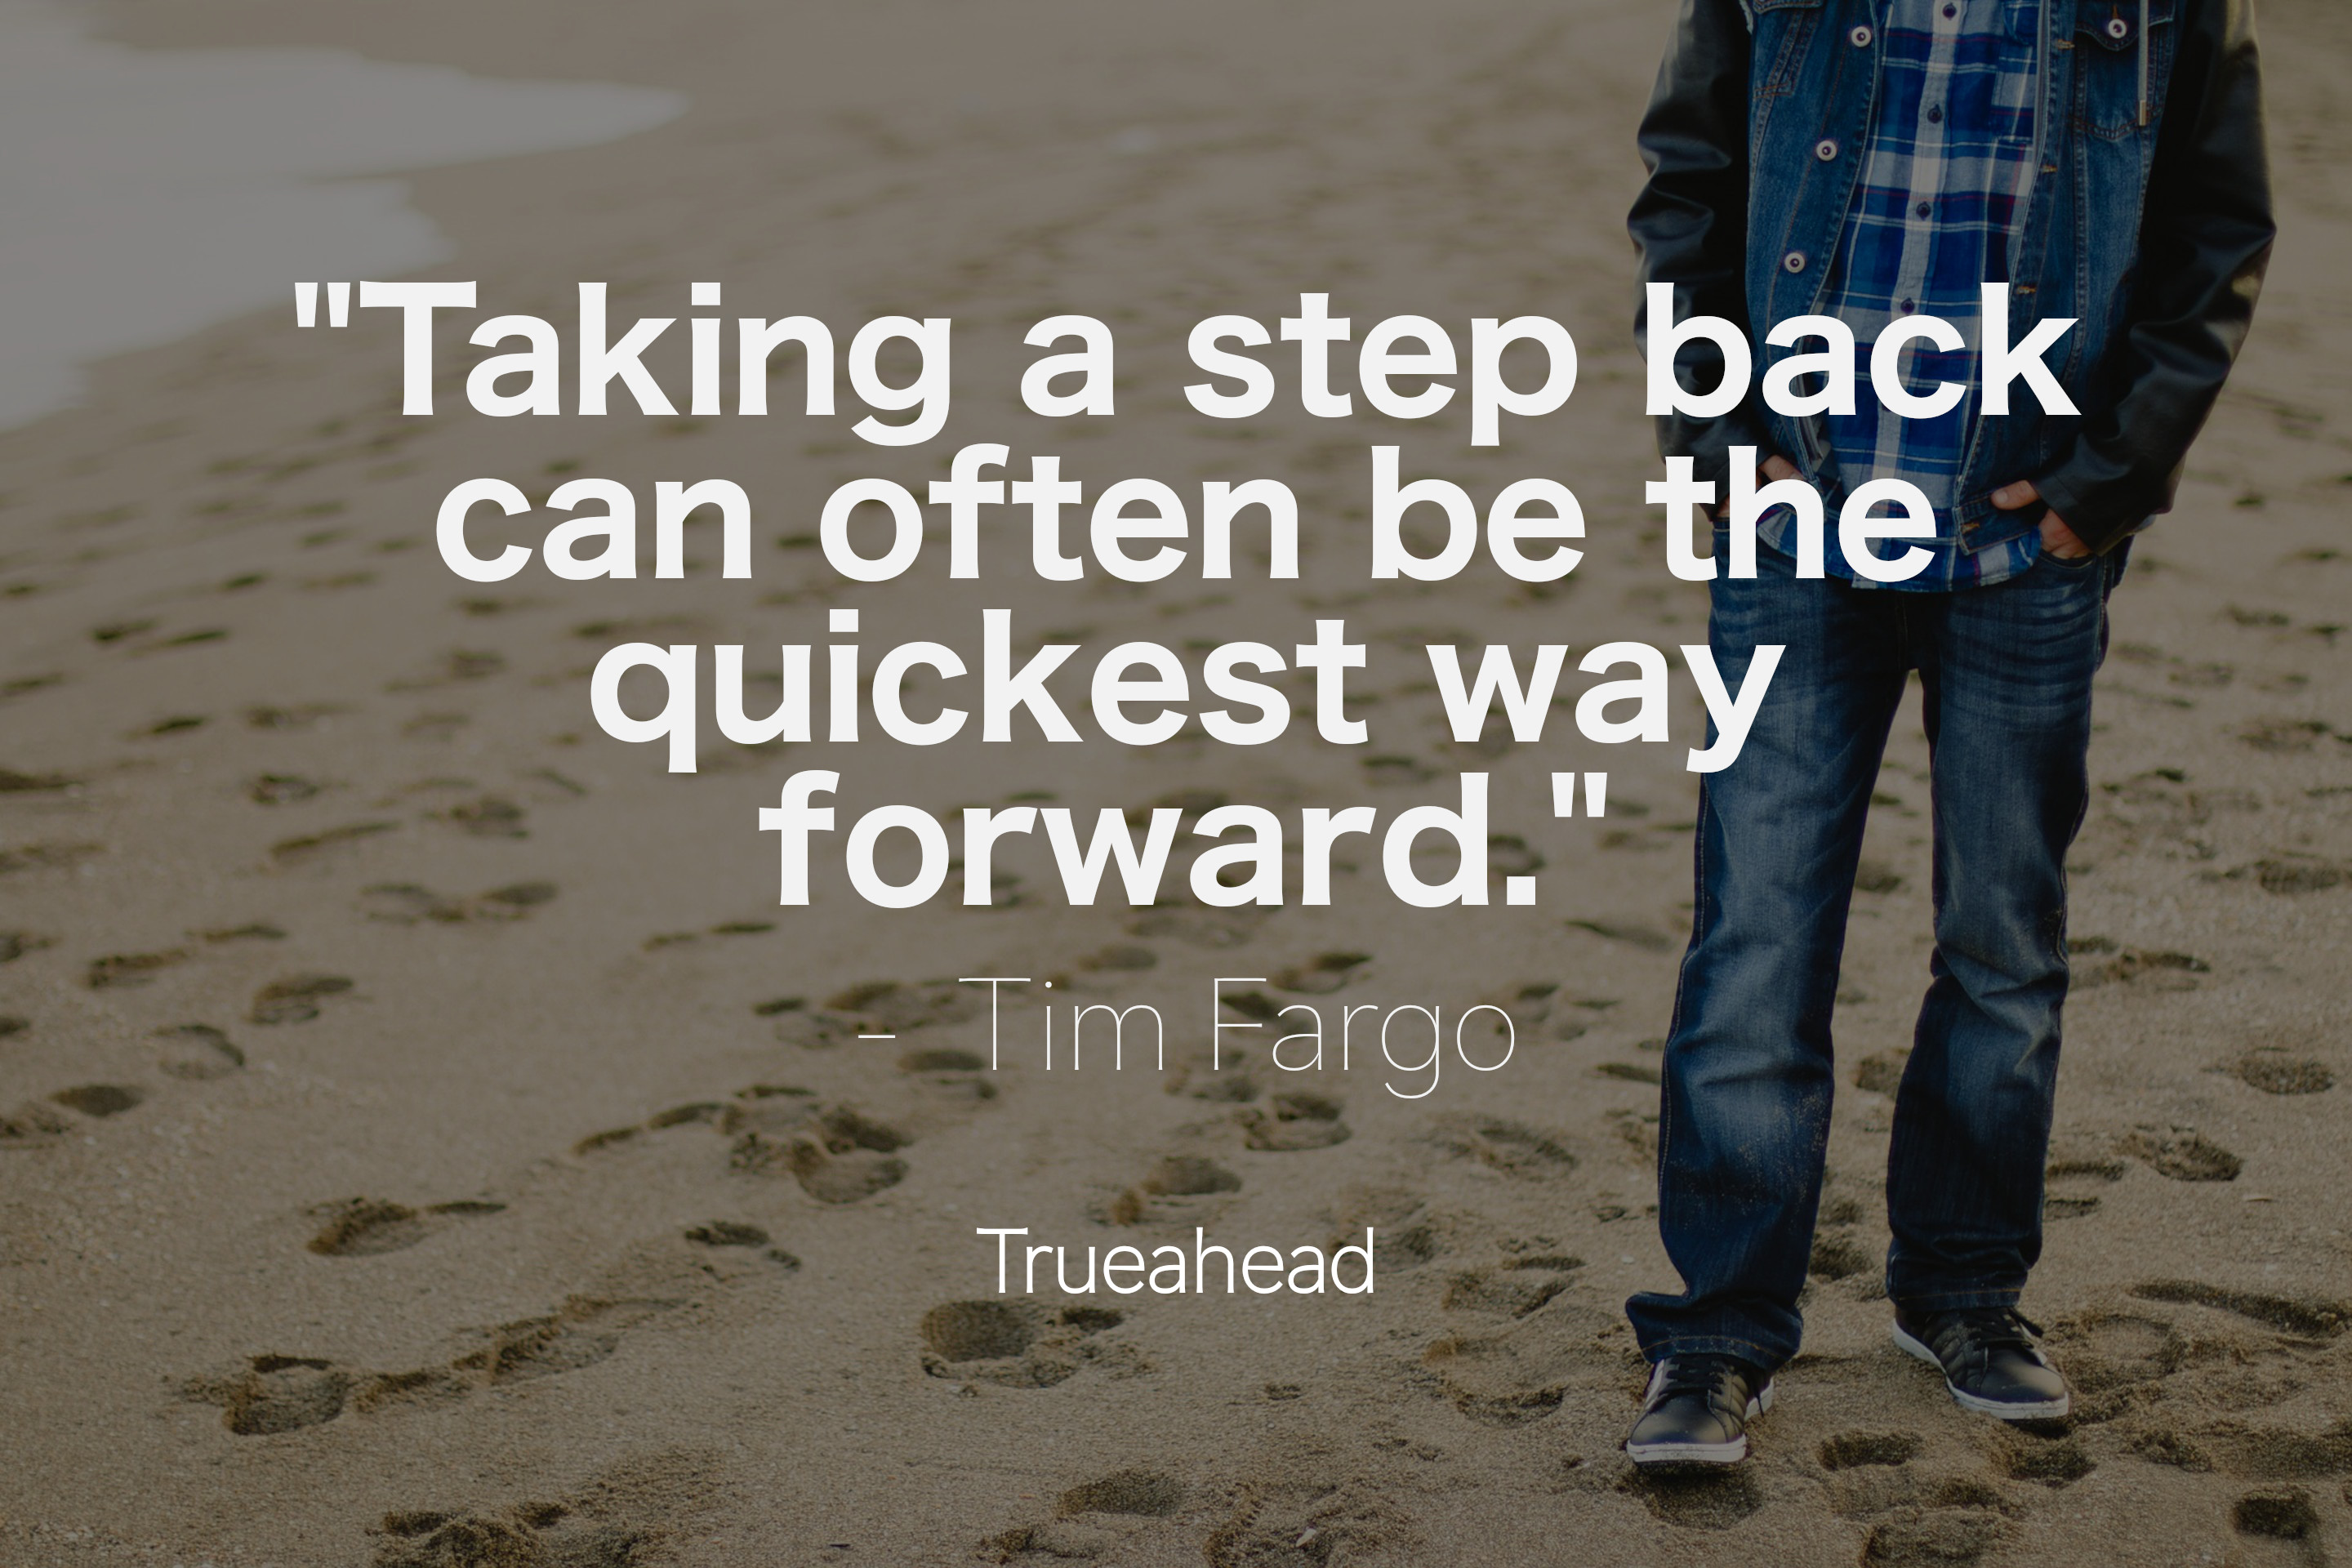 About Stepping Back by Tim Fargo - Quotes